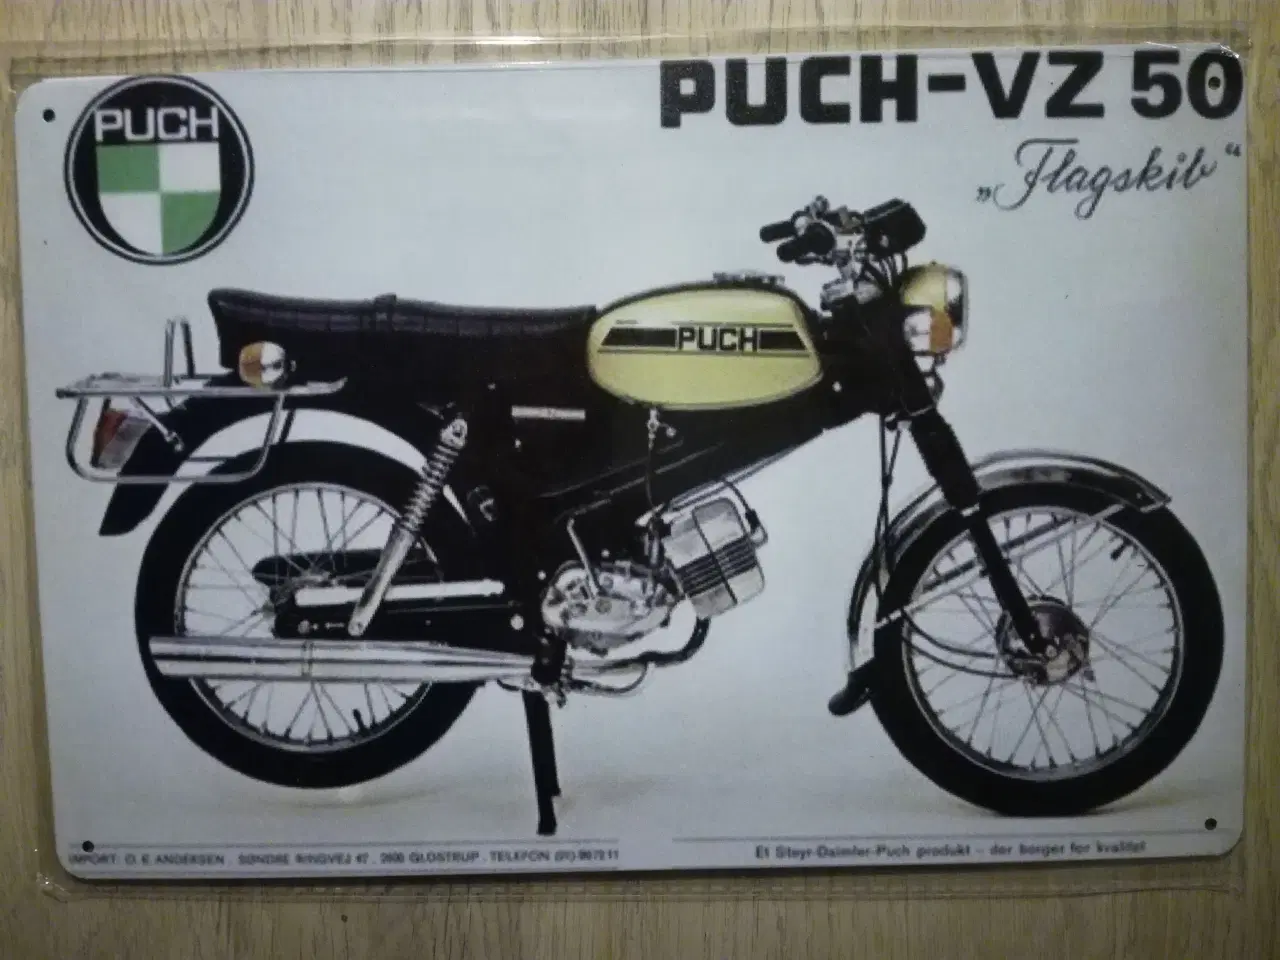 Billede 6 - puch maxi, puch mz50, puch monza juvel, puch ms50 